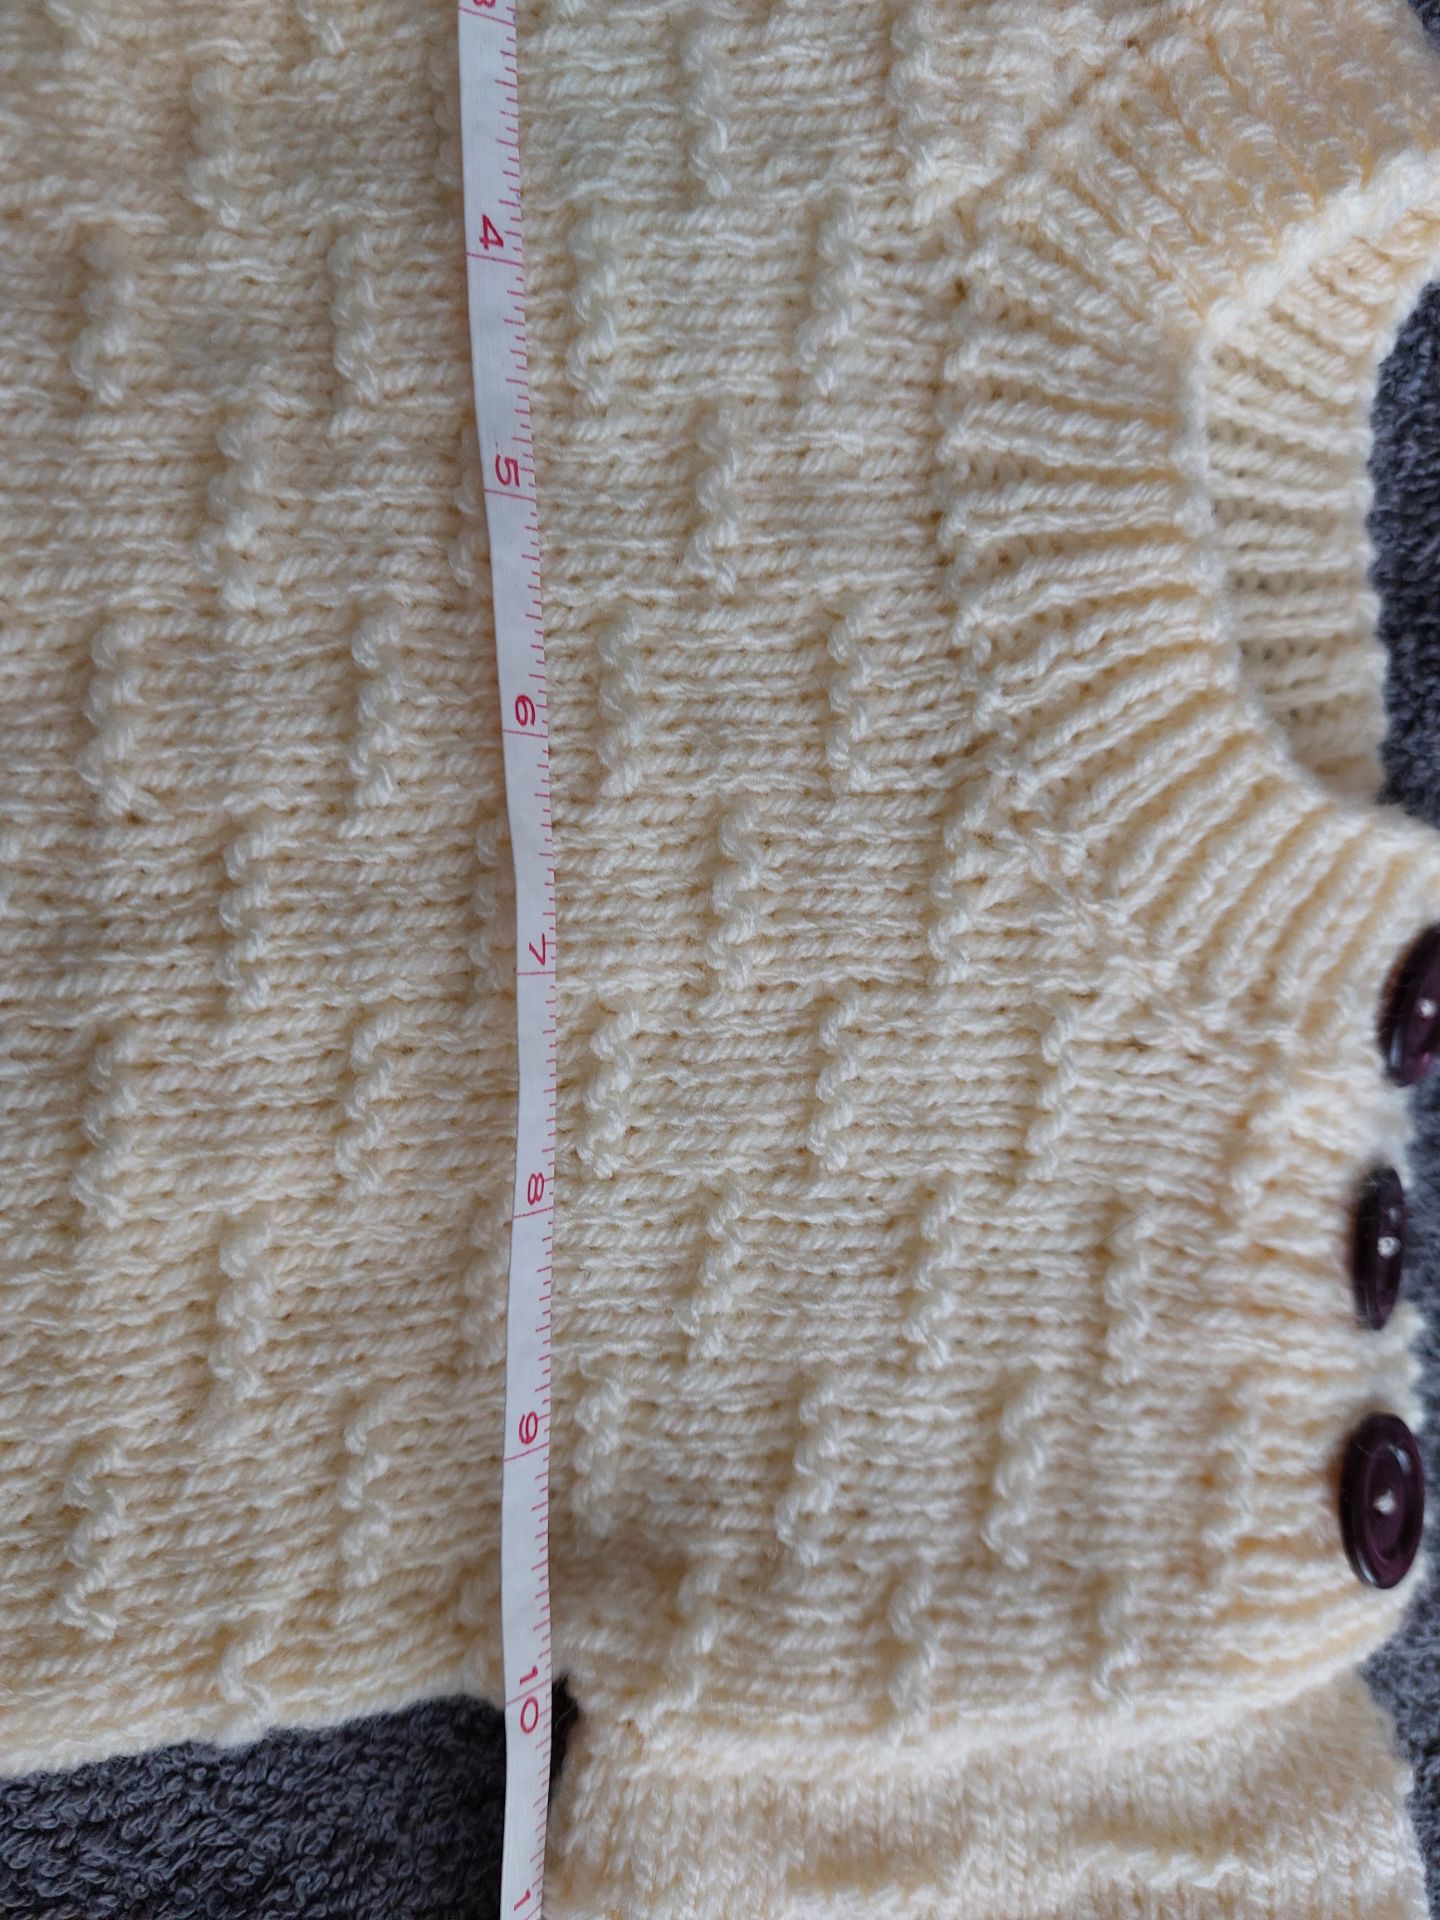 Hand Knitted Baby Jumper - Image 2 of 4